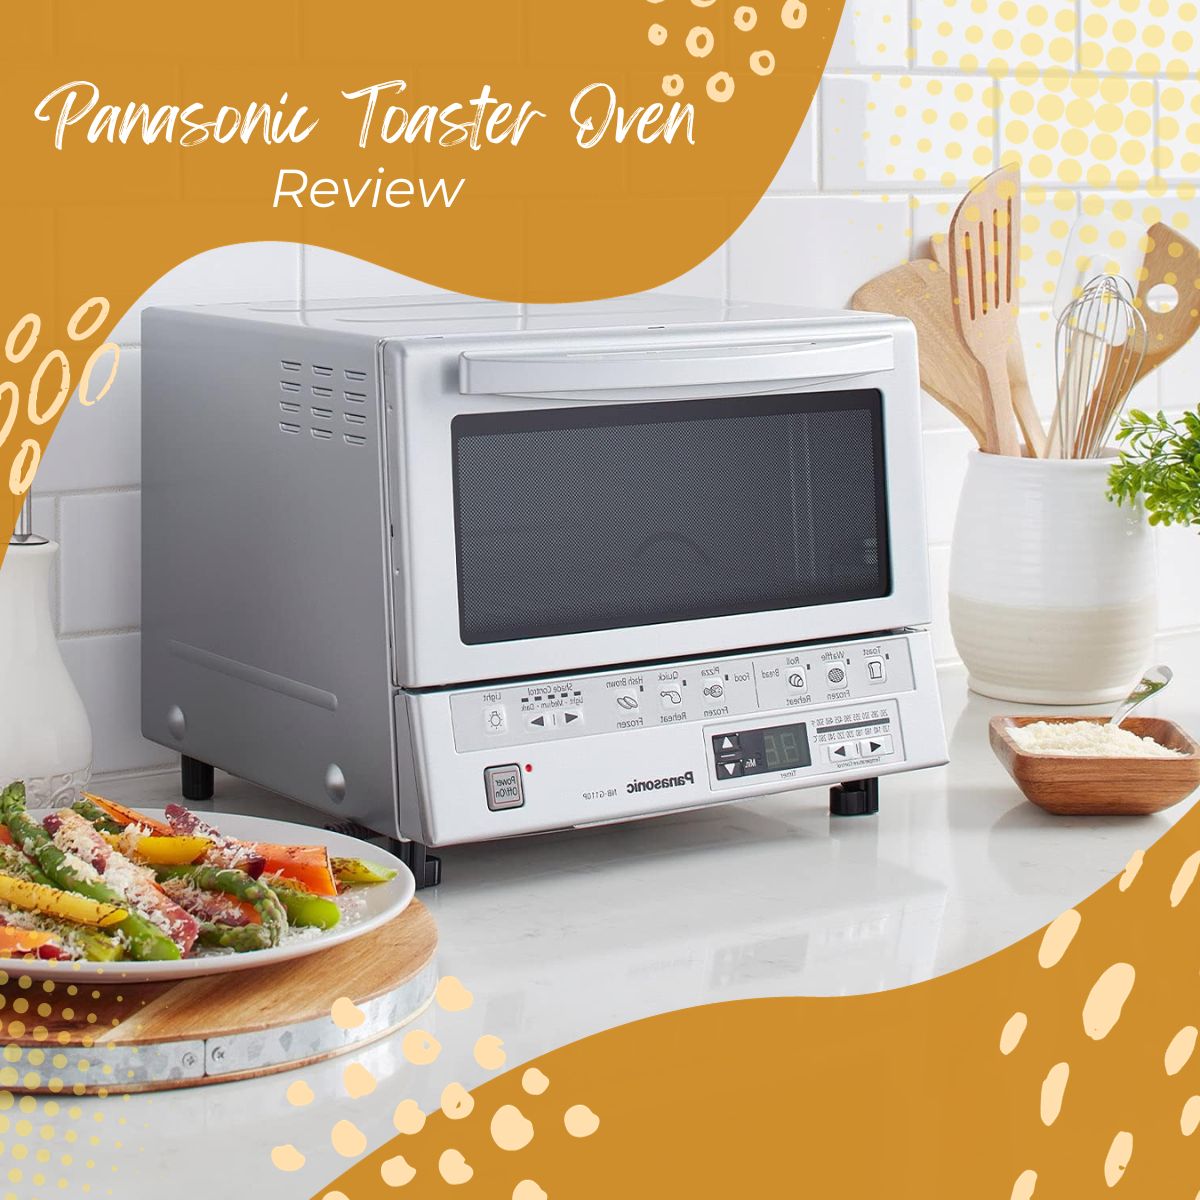 Panasonic FlashXpress Toaster Oven in-depth review